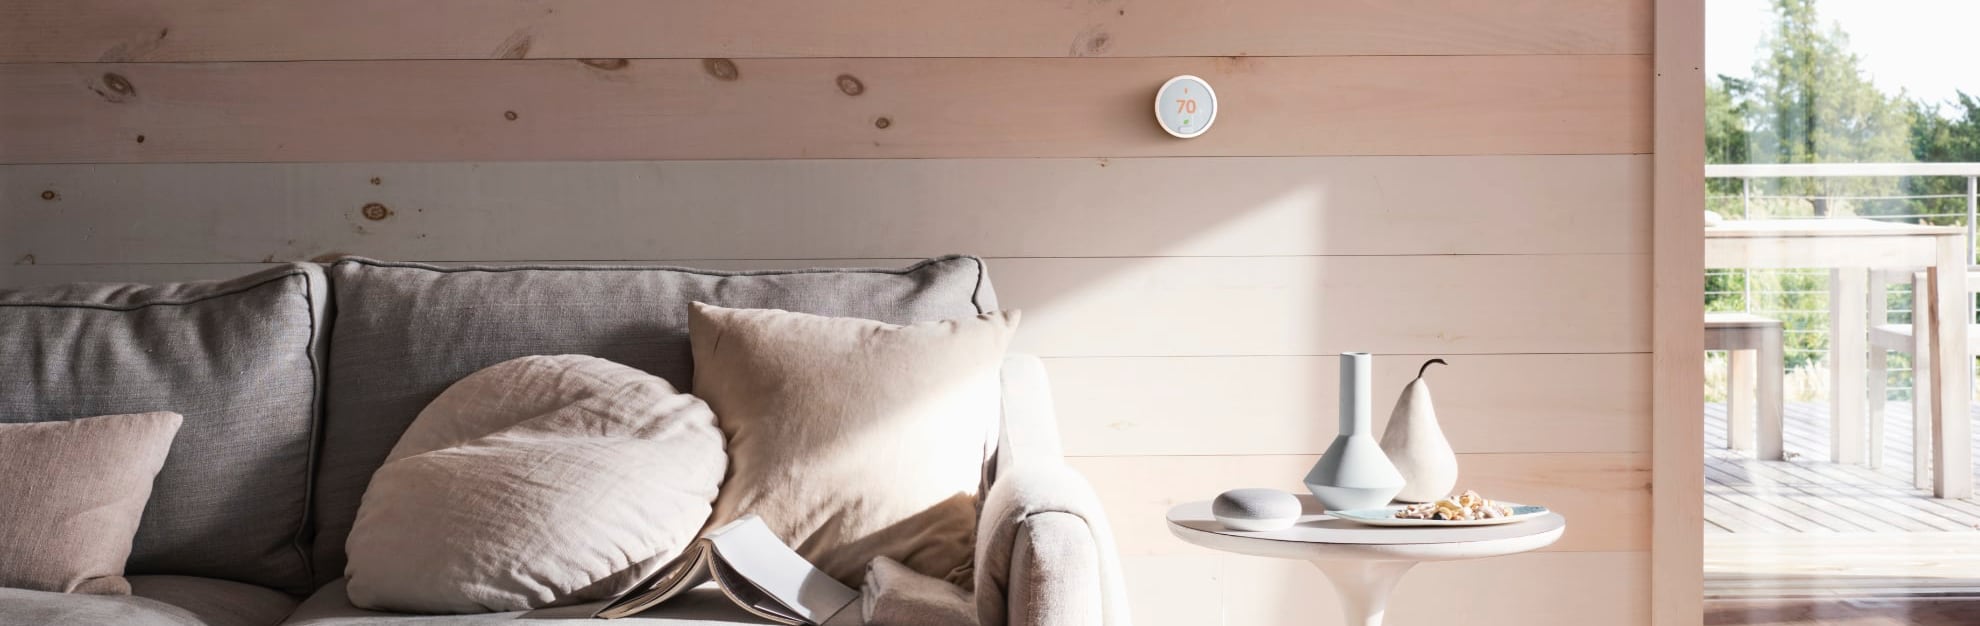 Vivint Home Automation in Logan